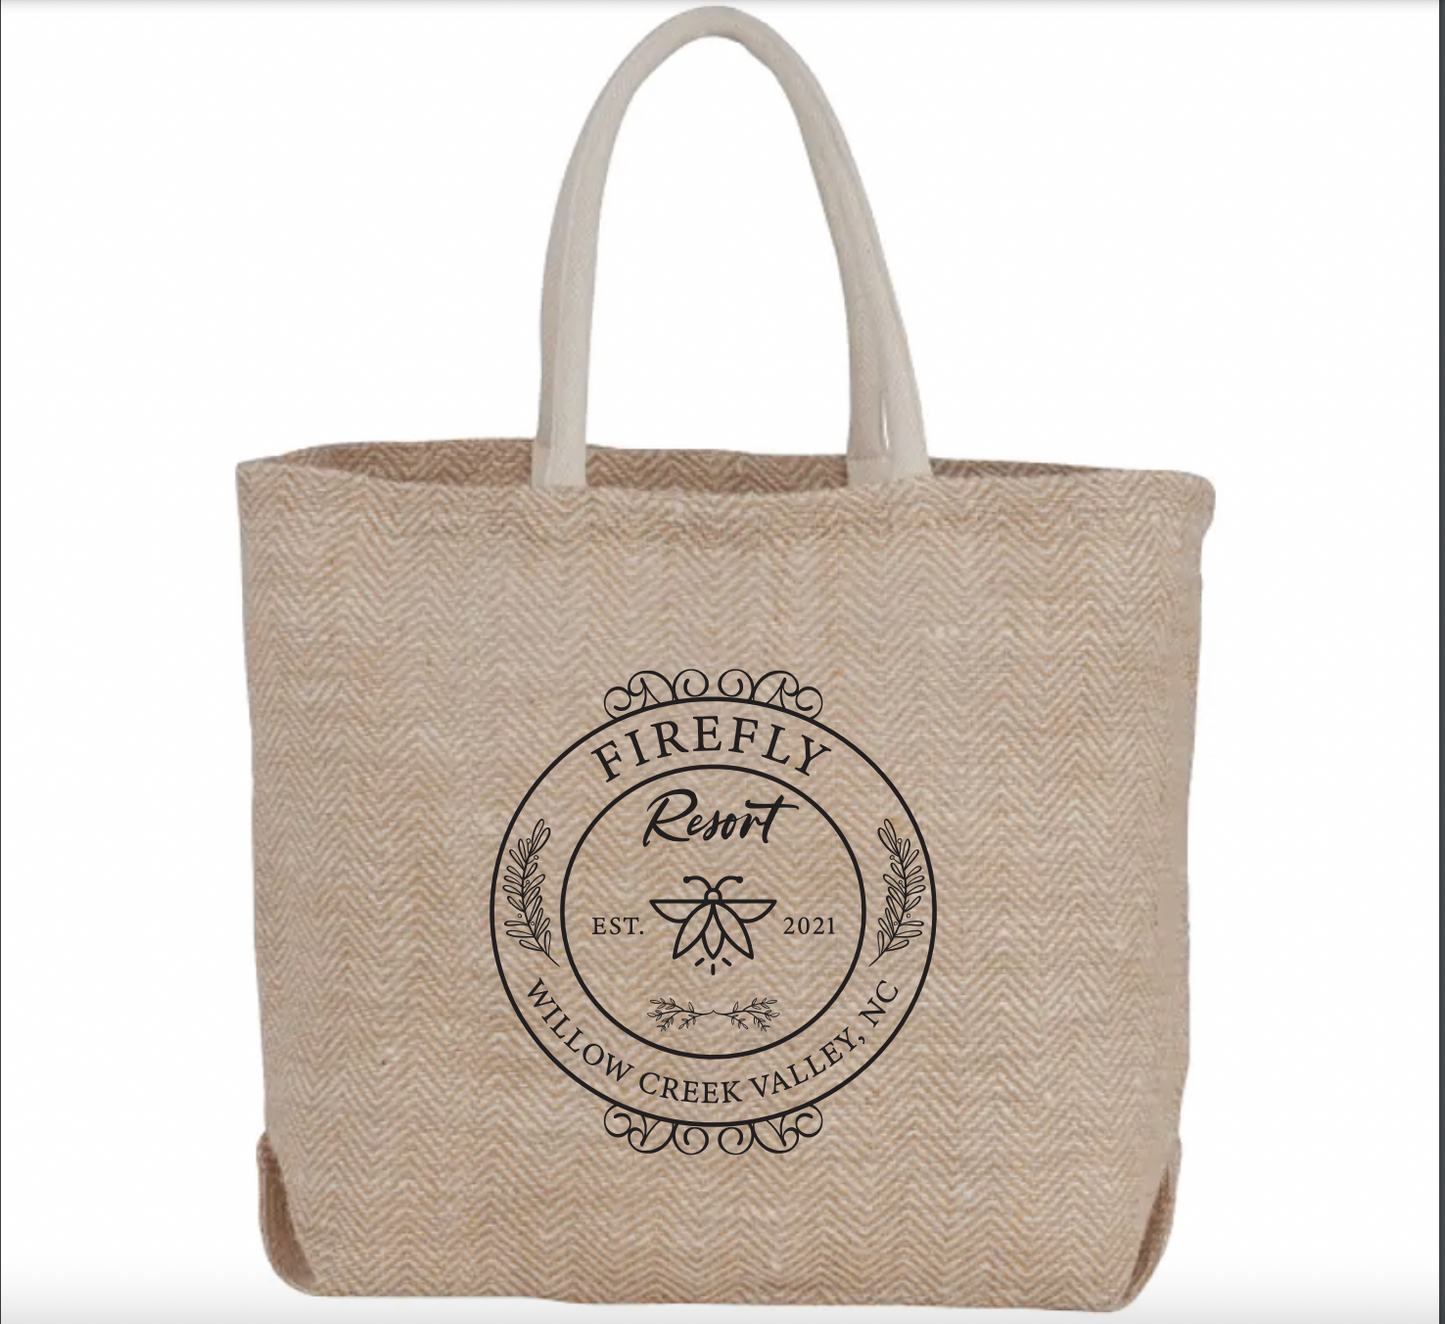 Firefly Resort Tote Bag (Willow Creek Valley Series)